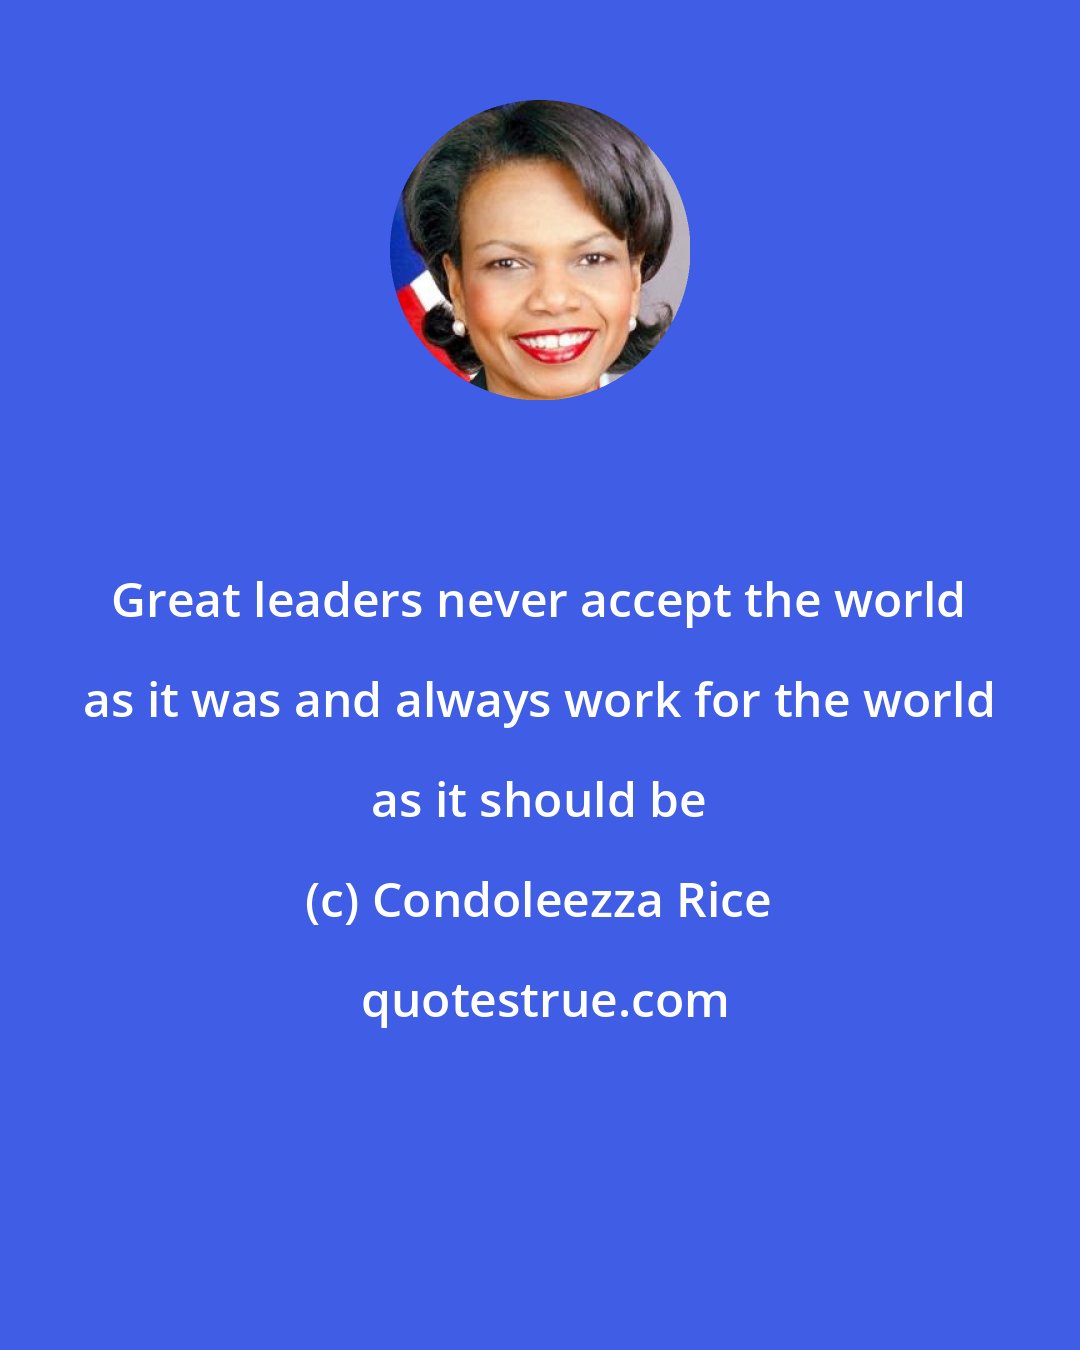 Condoleezza Rice: Great leaders never accept the world as it was and always work for the world as it should be